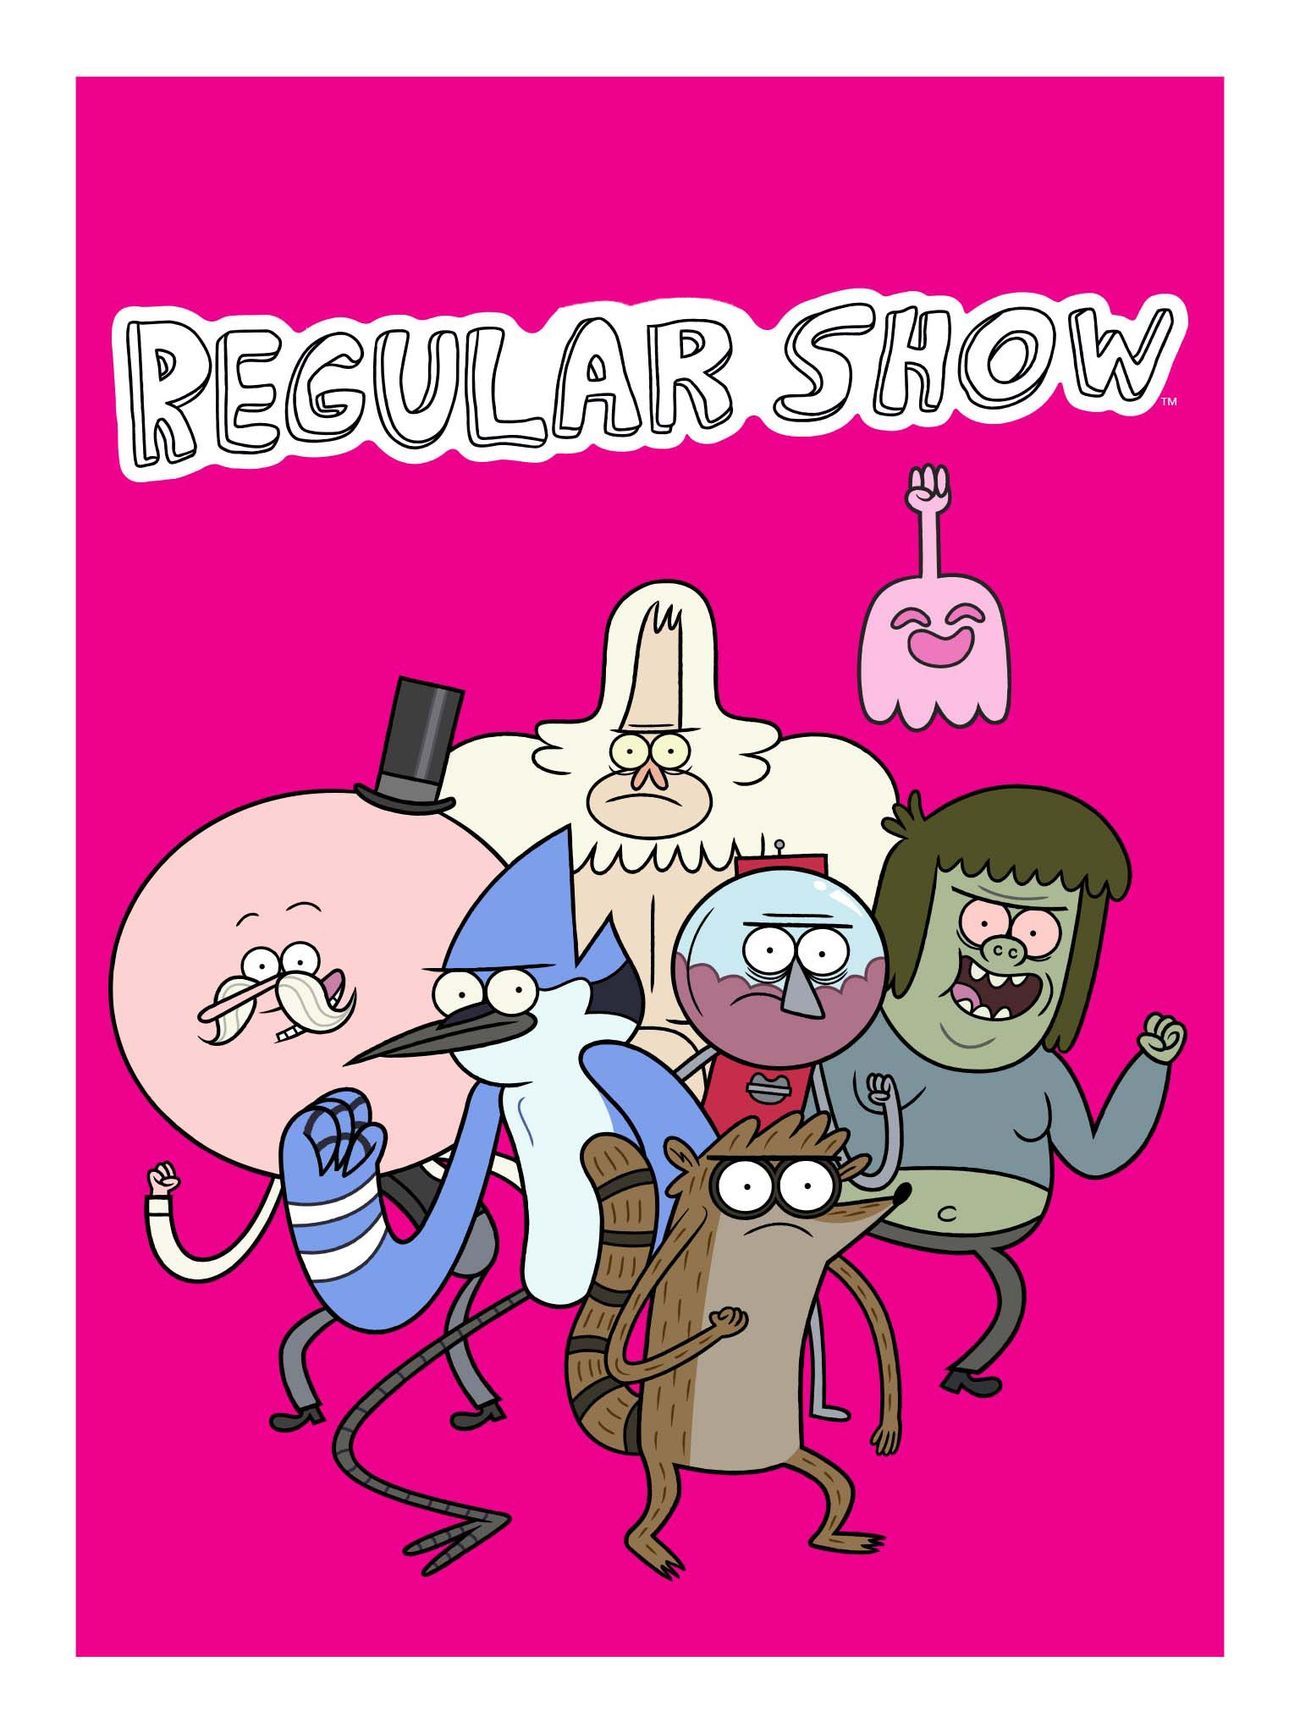 when should i watch regular show the movie